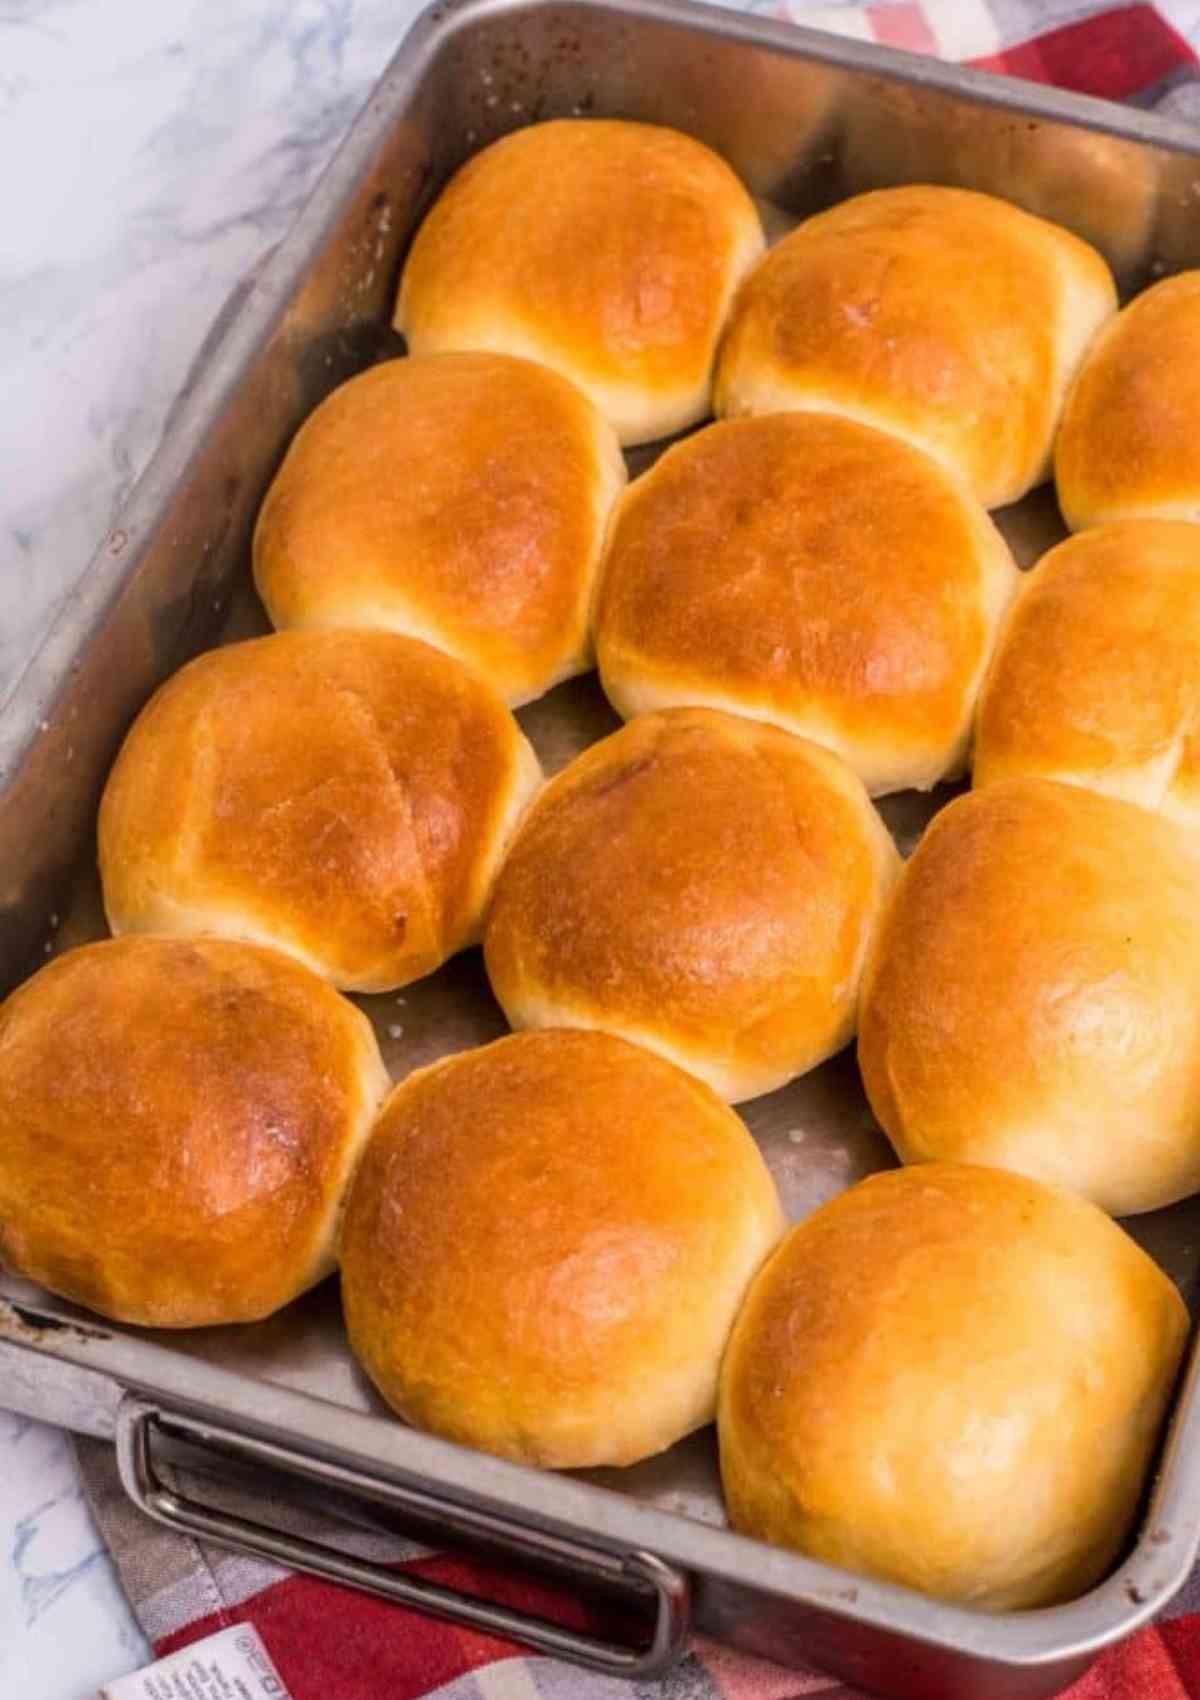 Pav bread baked and served on a baking dish